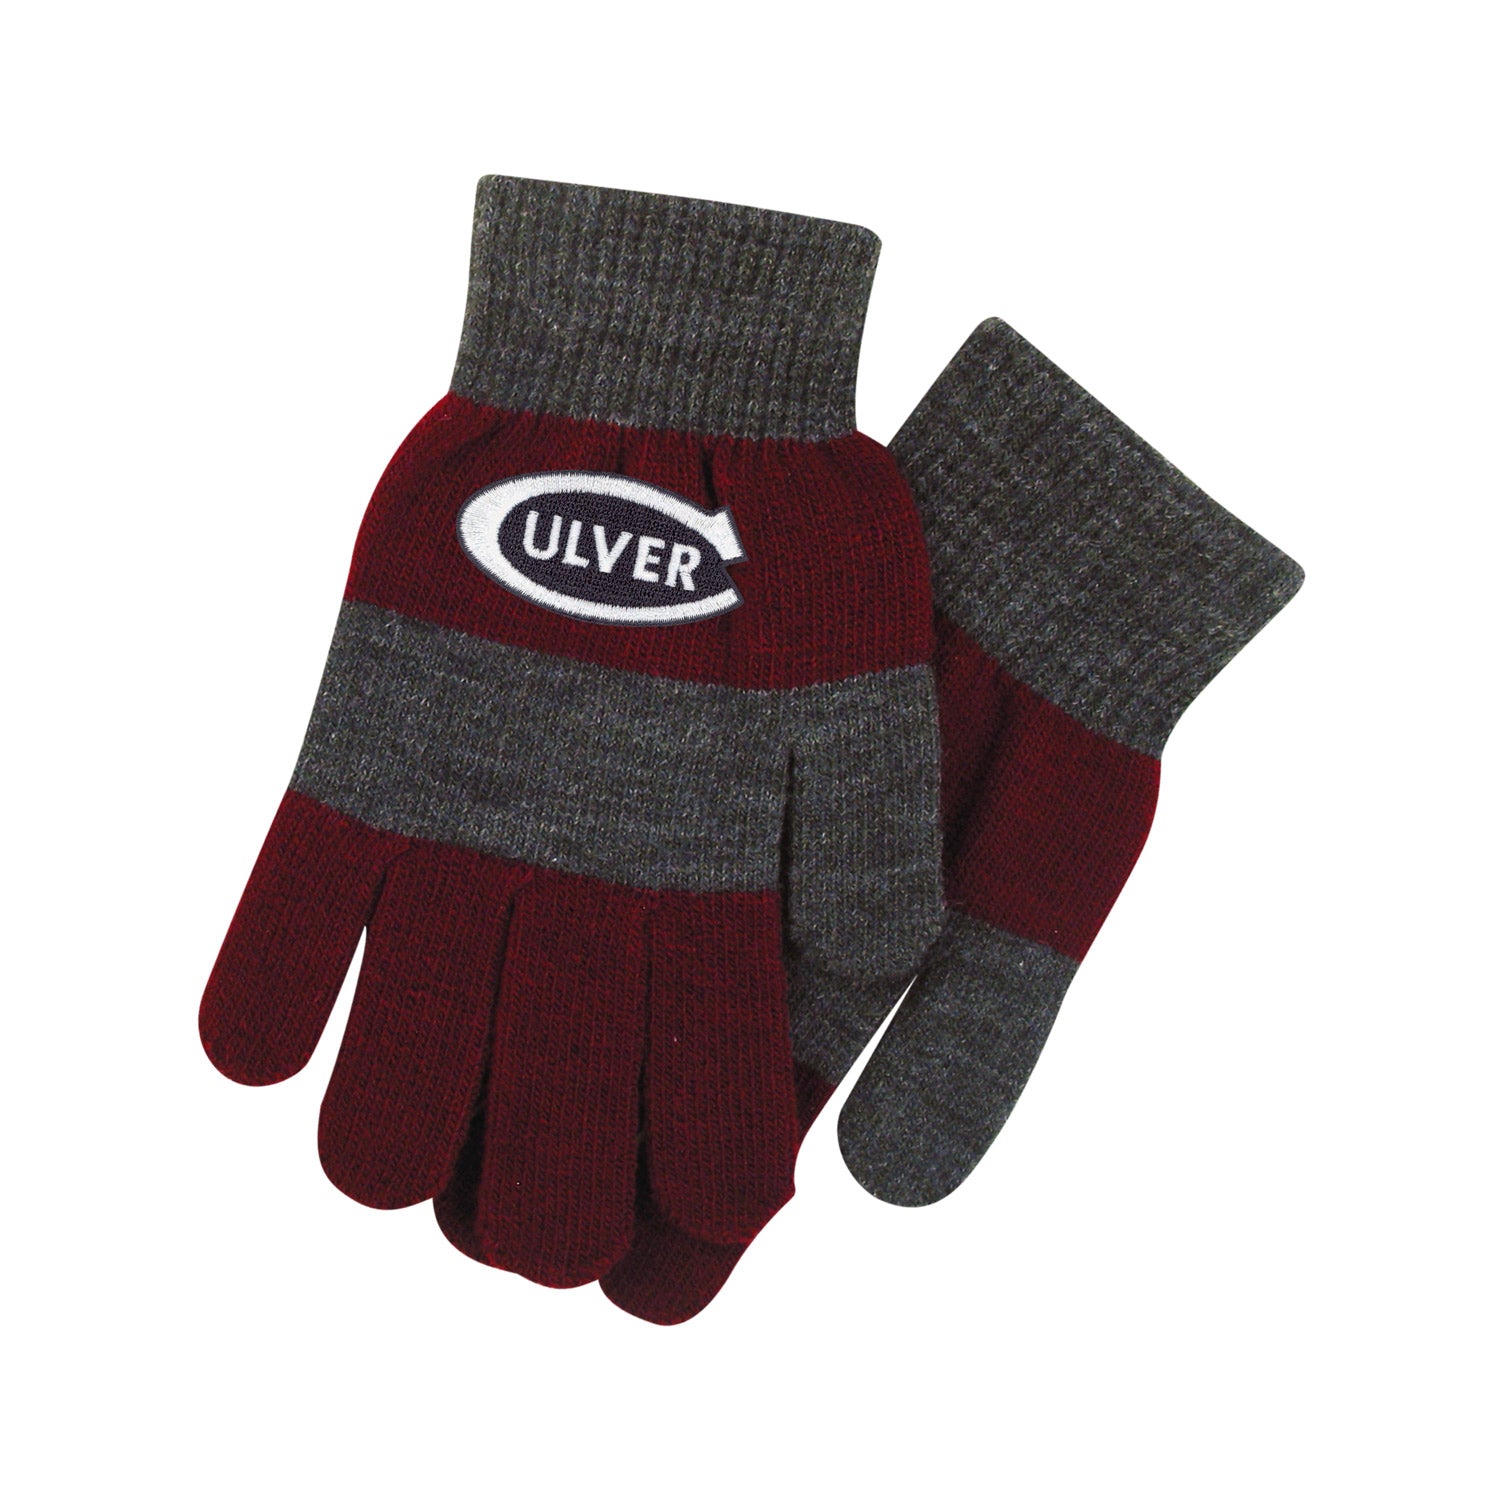 Trixie Gloves -Maroon/Charcoal